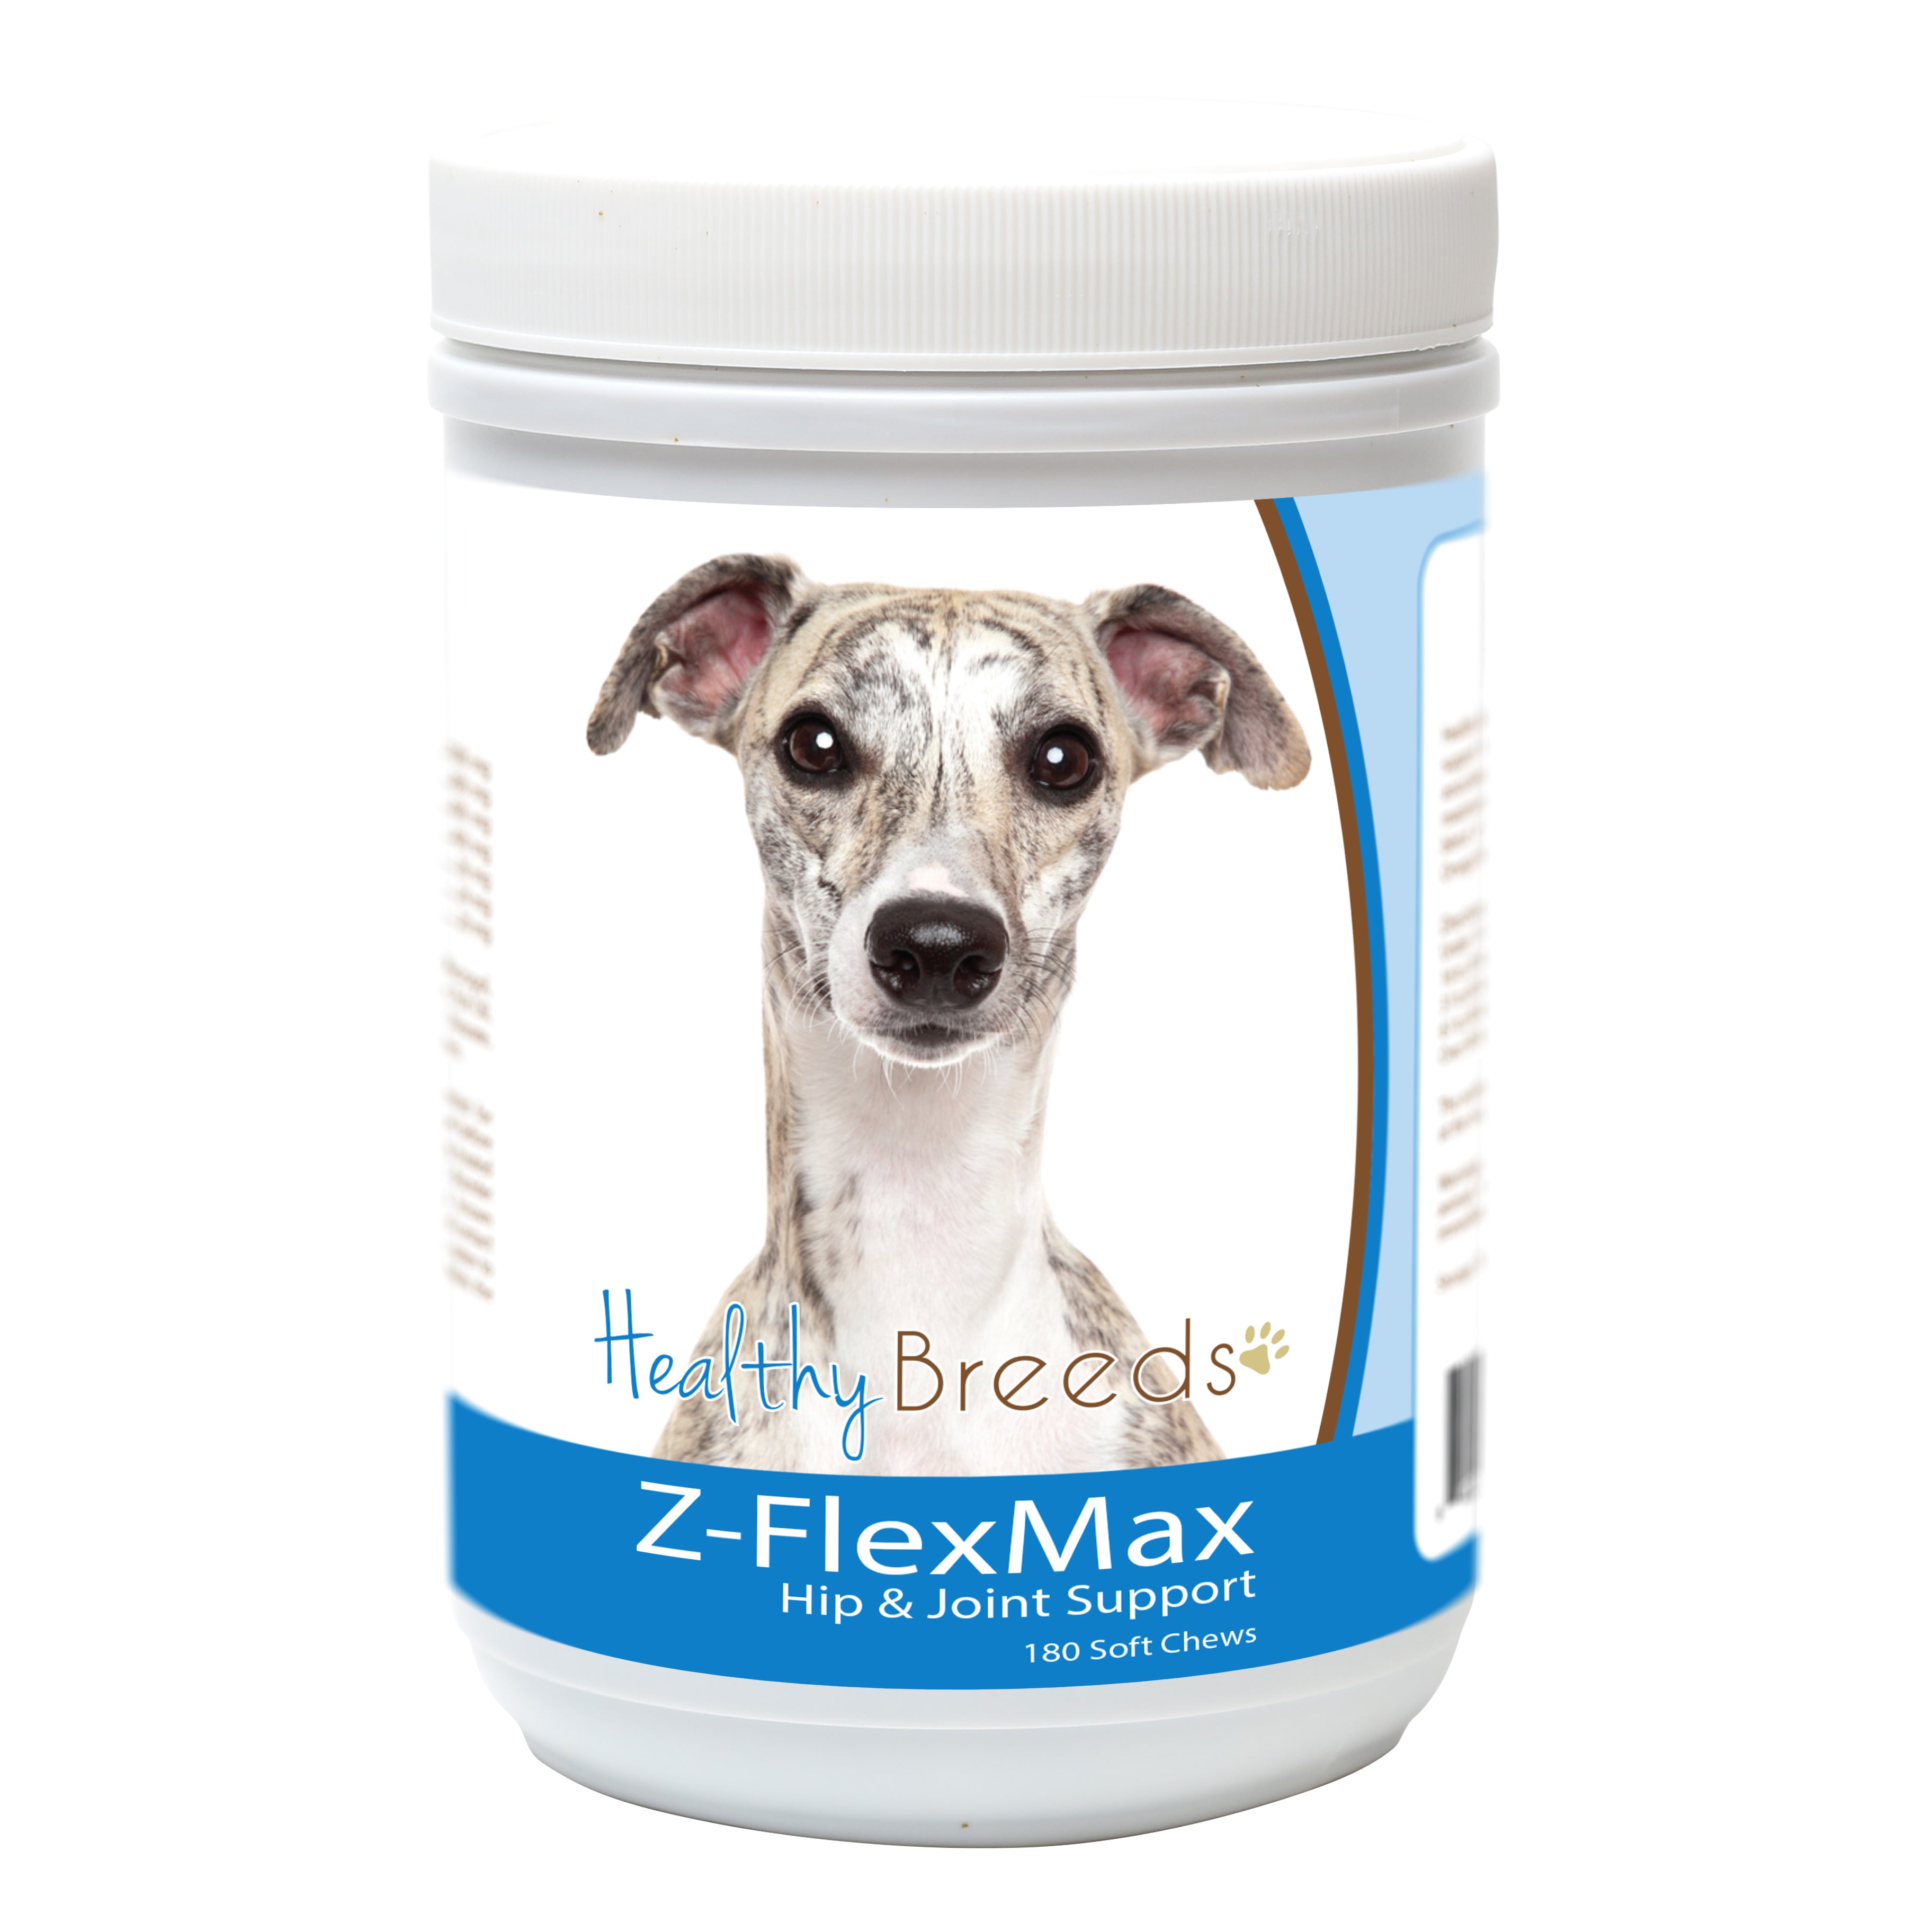 Whippet Z-Flex Max Dog Hip and Joint Support 180 Count